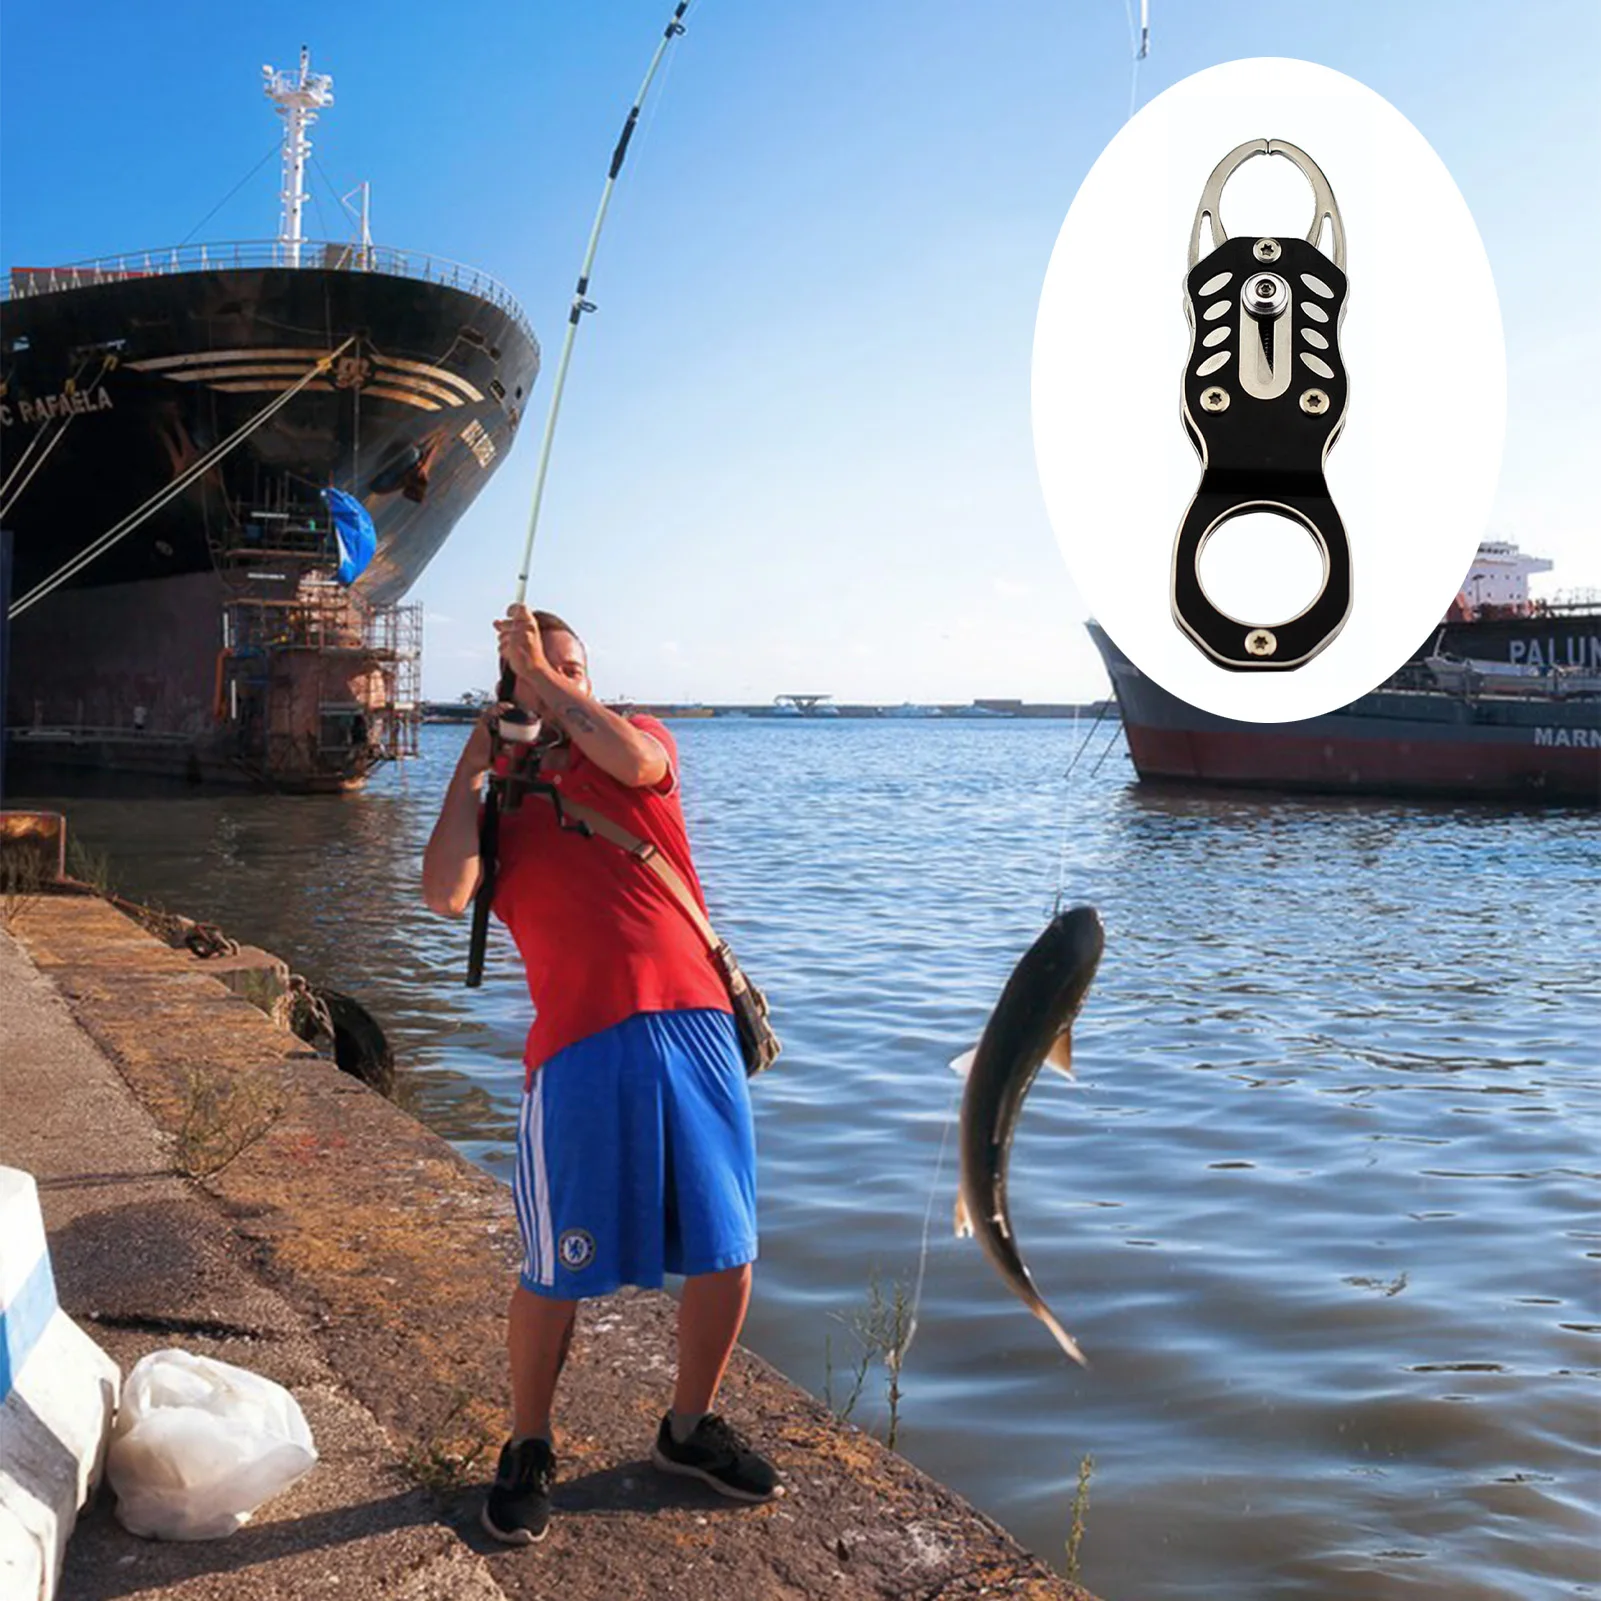 https://ae01.alicdn.com/kf/Sc263a01db338469483991ba0ff5c2e9es/Outdoors-Fish-Lip-Grippers-with-Lanyard-Hand-Controller-Grabber-Tool-Fish-Holder-Great-Fish-Holder-for.jpg